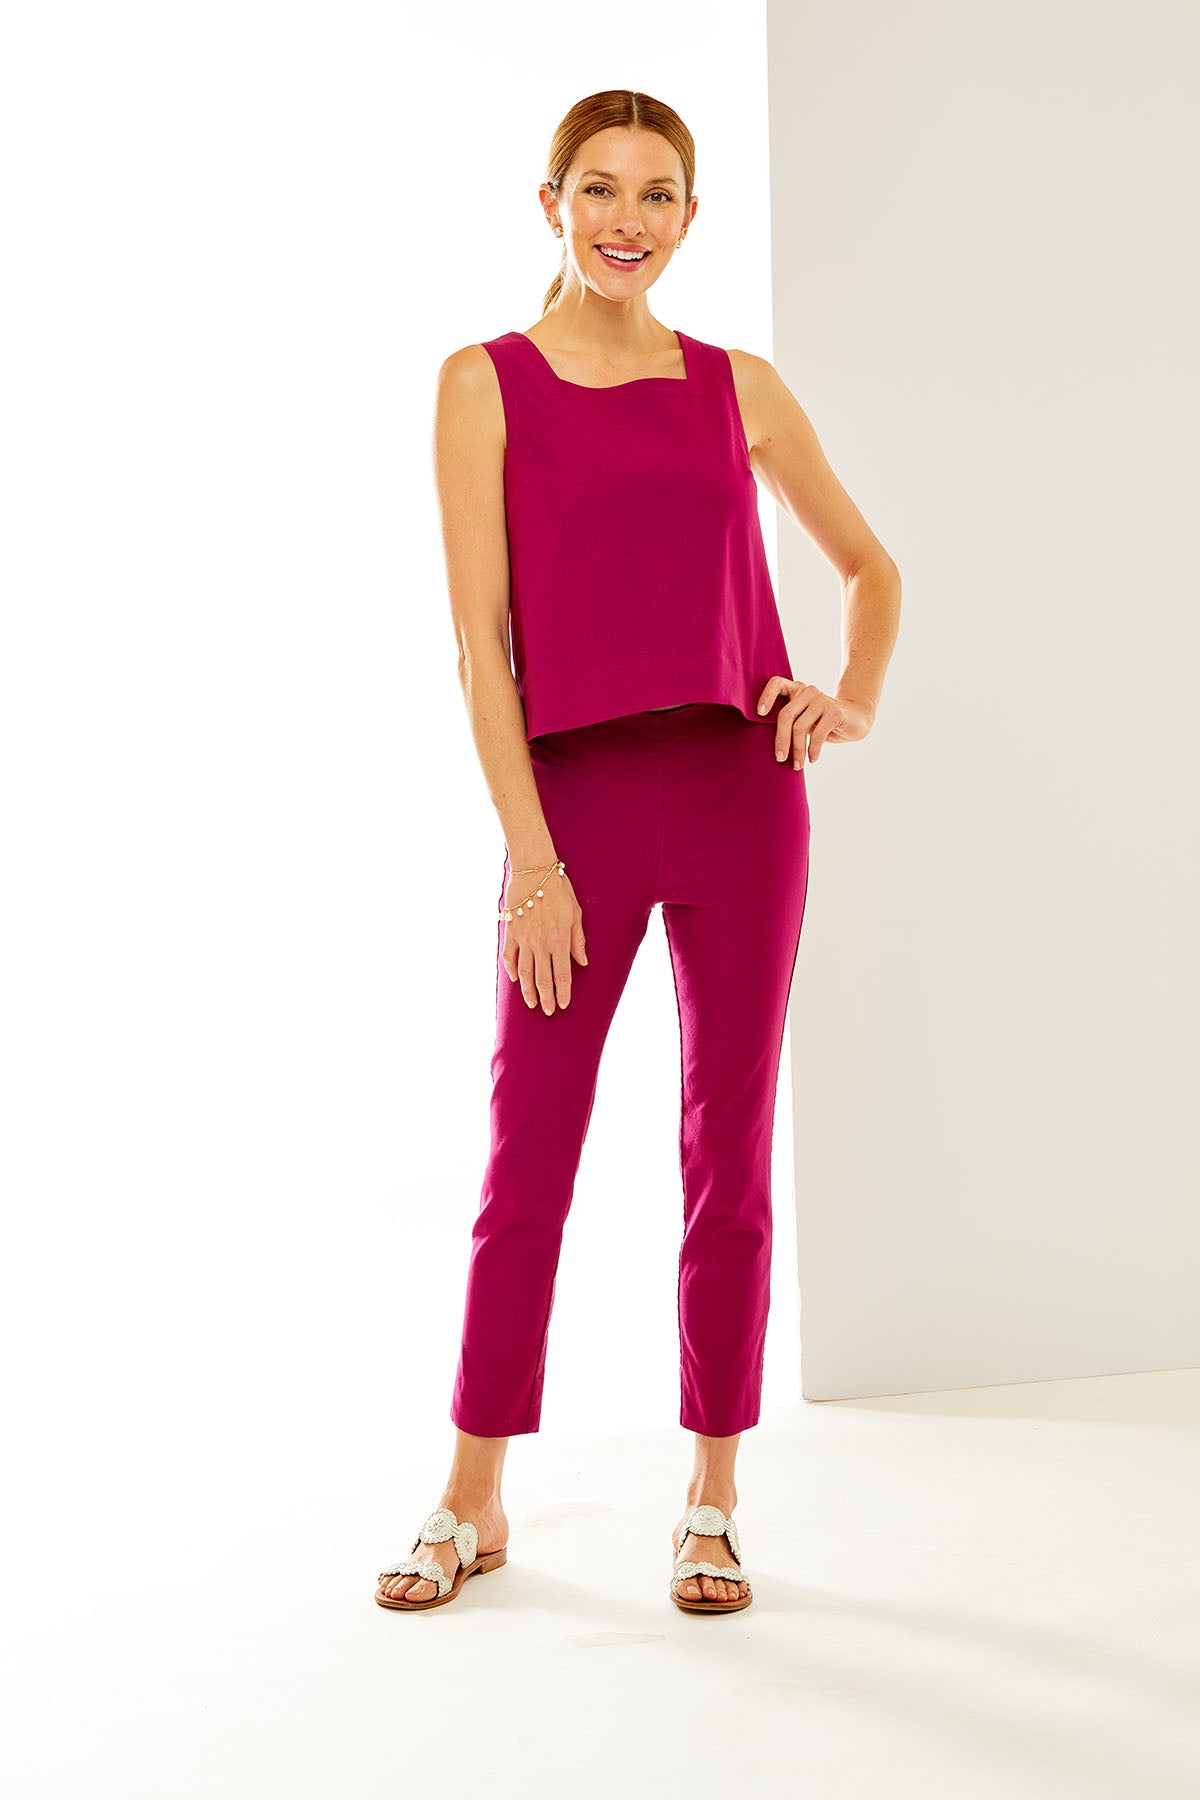 The best-selling Sara Campbell Sheri Pants in boysenberry